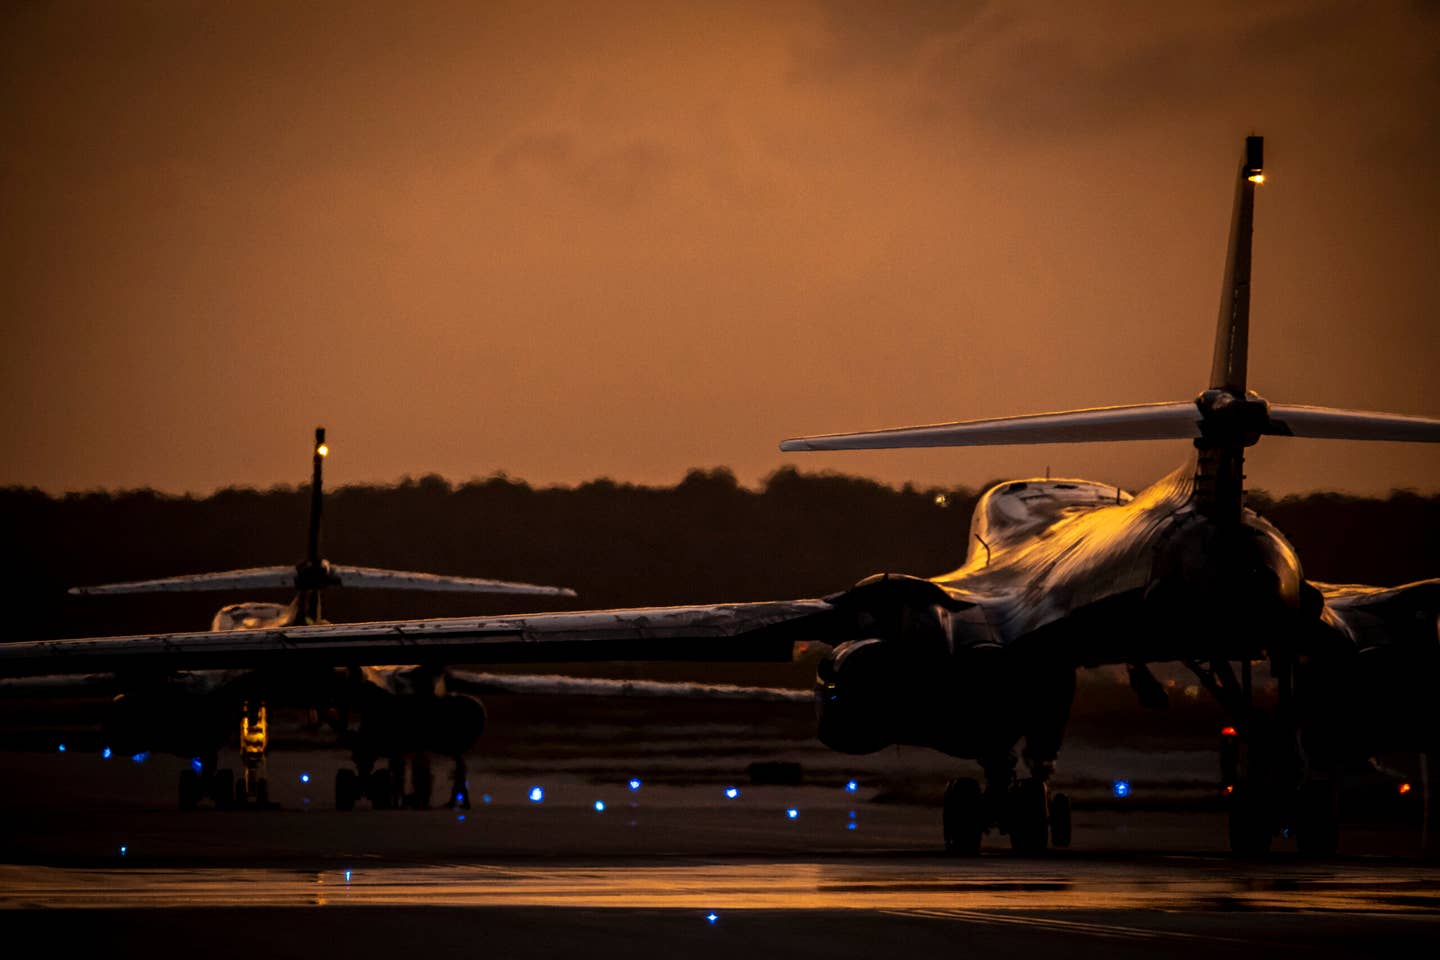 Two Lancers taxi after receiving a fresh water rinse at Anderson Air Force Base, June 8, 2022. <em>U.S. Air Force photo by Tech. Sgt. Chris Hibben</em>